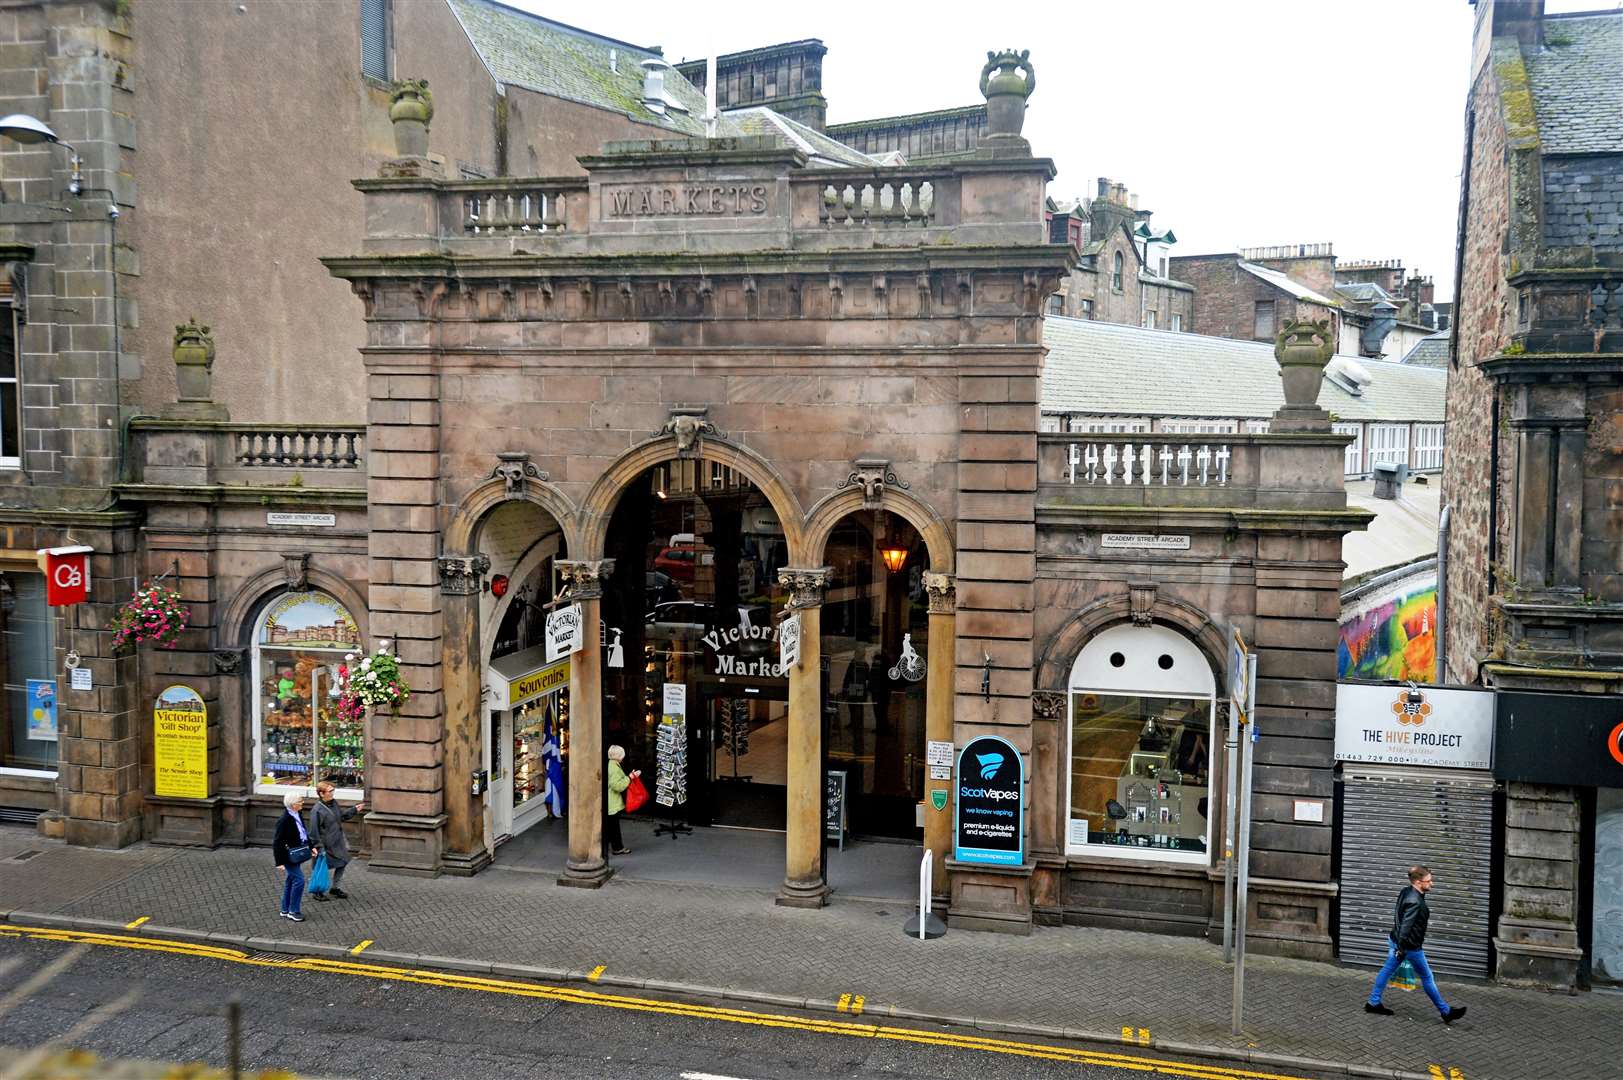 Plans to refubish the Victorian Market have been approved.